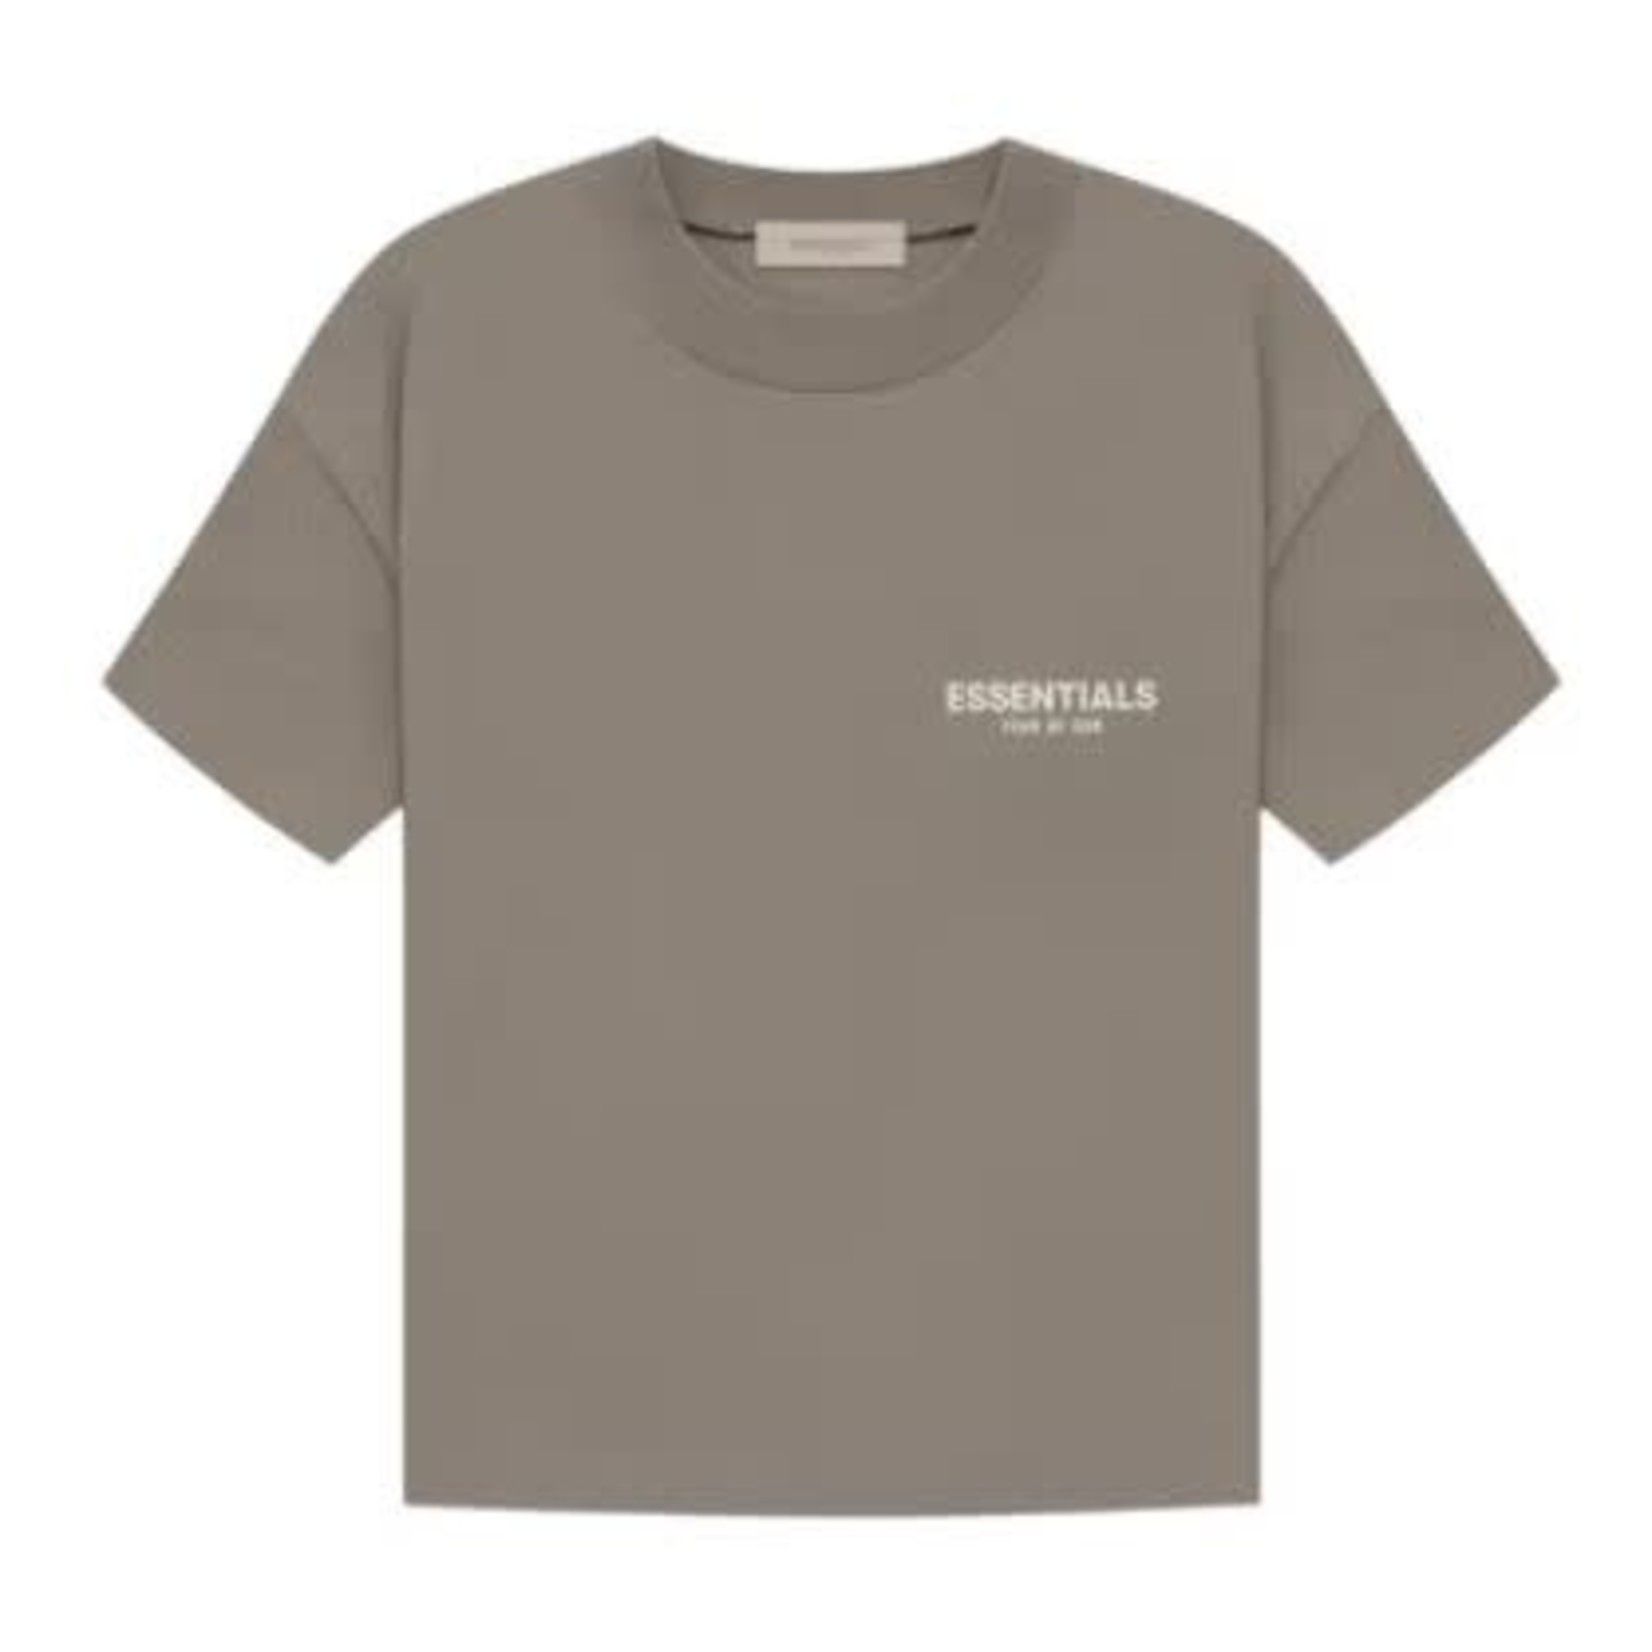 Fear of God Fear Of God Essentials T-Shirt Desert Taupe Size Large, DS BRAND NEW